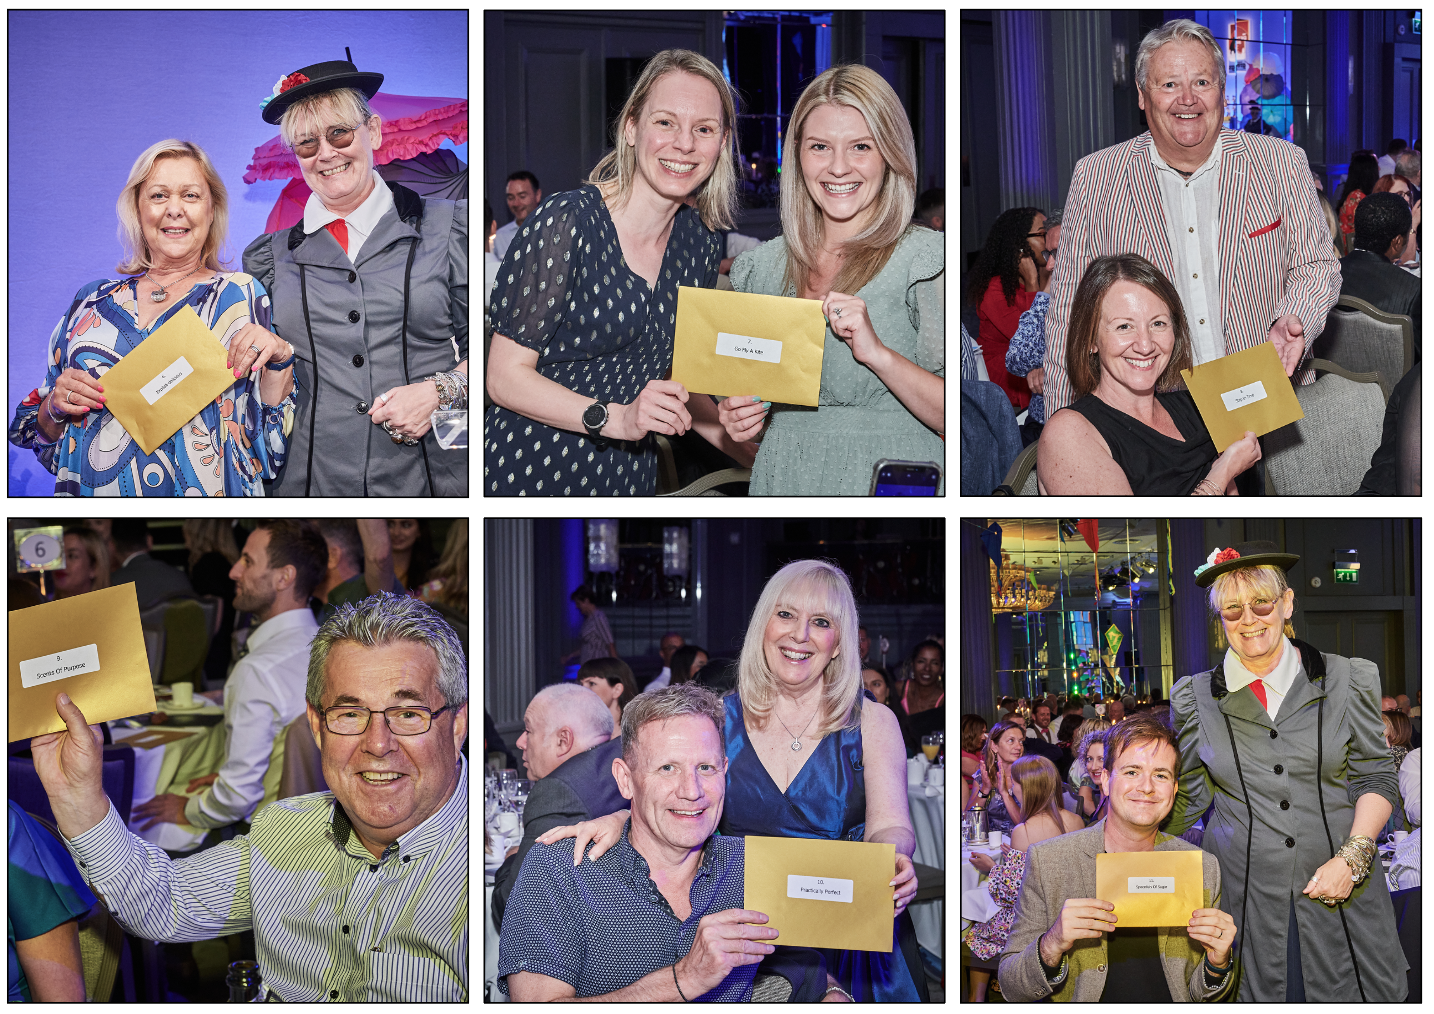 Above: Retas raffle winners (clockwise from top left) Mary Singleton-Jones, Kristy Hammond, Heidi Early, Paul Slater, Andy Paterson, and Mark Callaby, with Max Publishing’s lovely Tracey Bearton, Sam Loveday, Jim Bullough, and Sue Marks